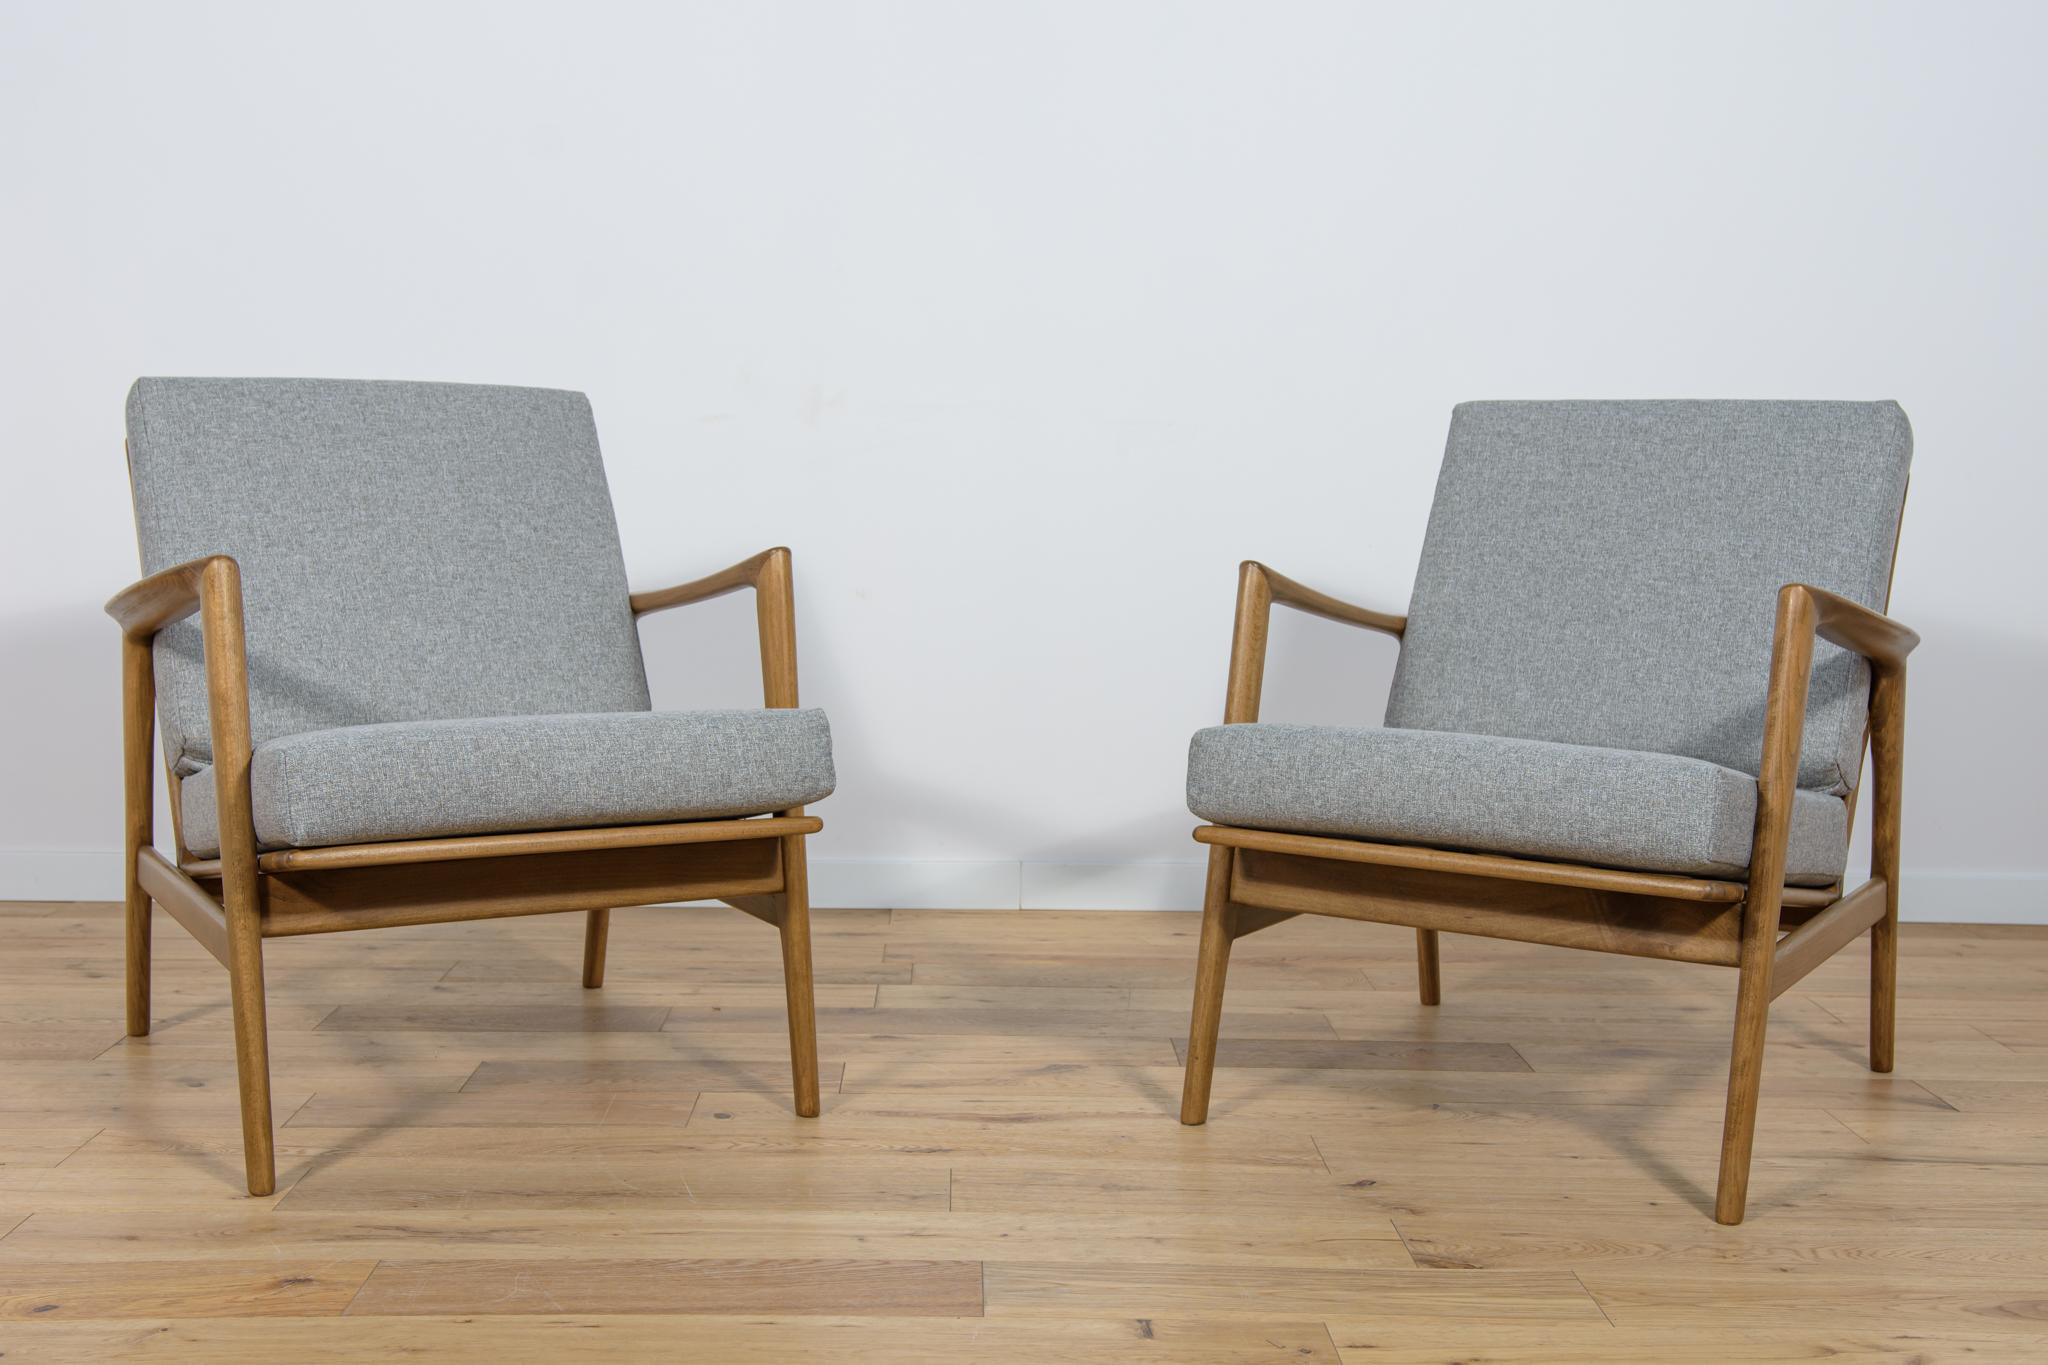 This pair of armchairs was produced by the Polish company Swarzędzka Furniture Factory in 60s.The armchairs have new cushions, reupholstered in a quality dark grey fabric. The beech framehas been cleaned, painted with a walnut colored stain, and